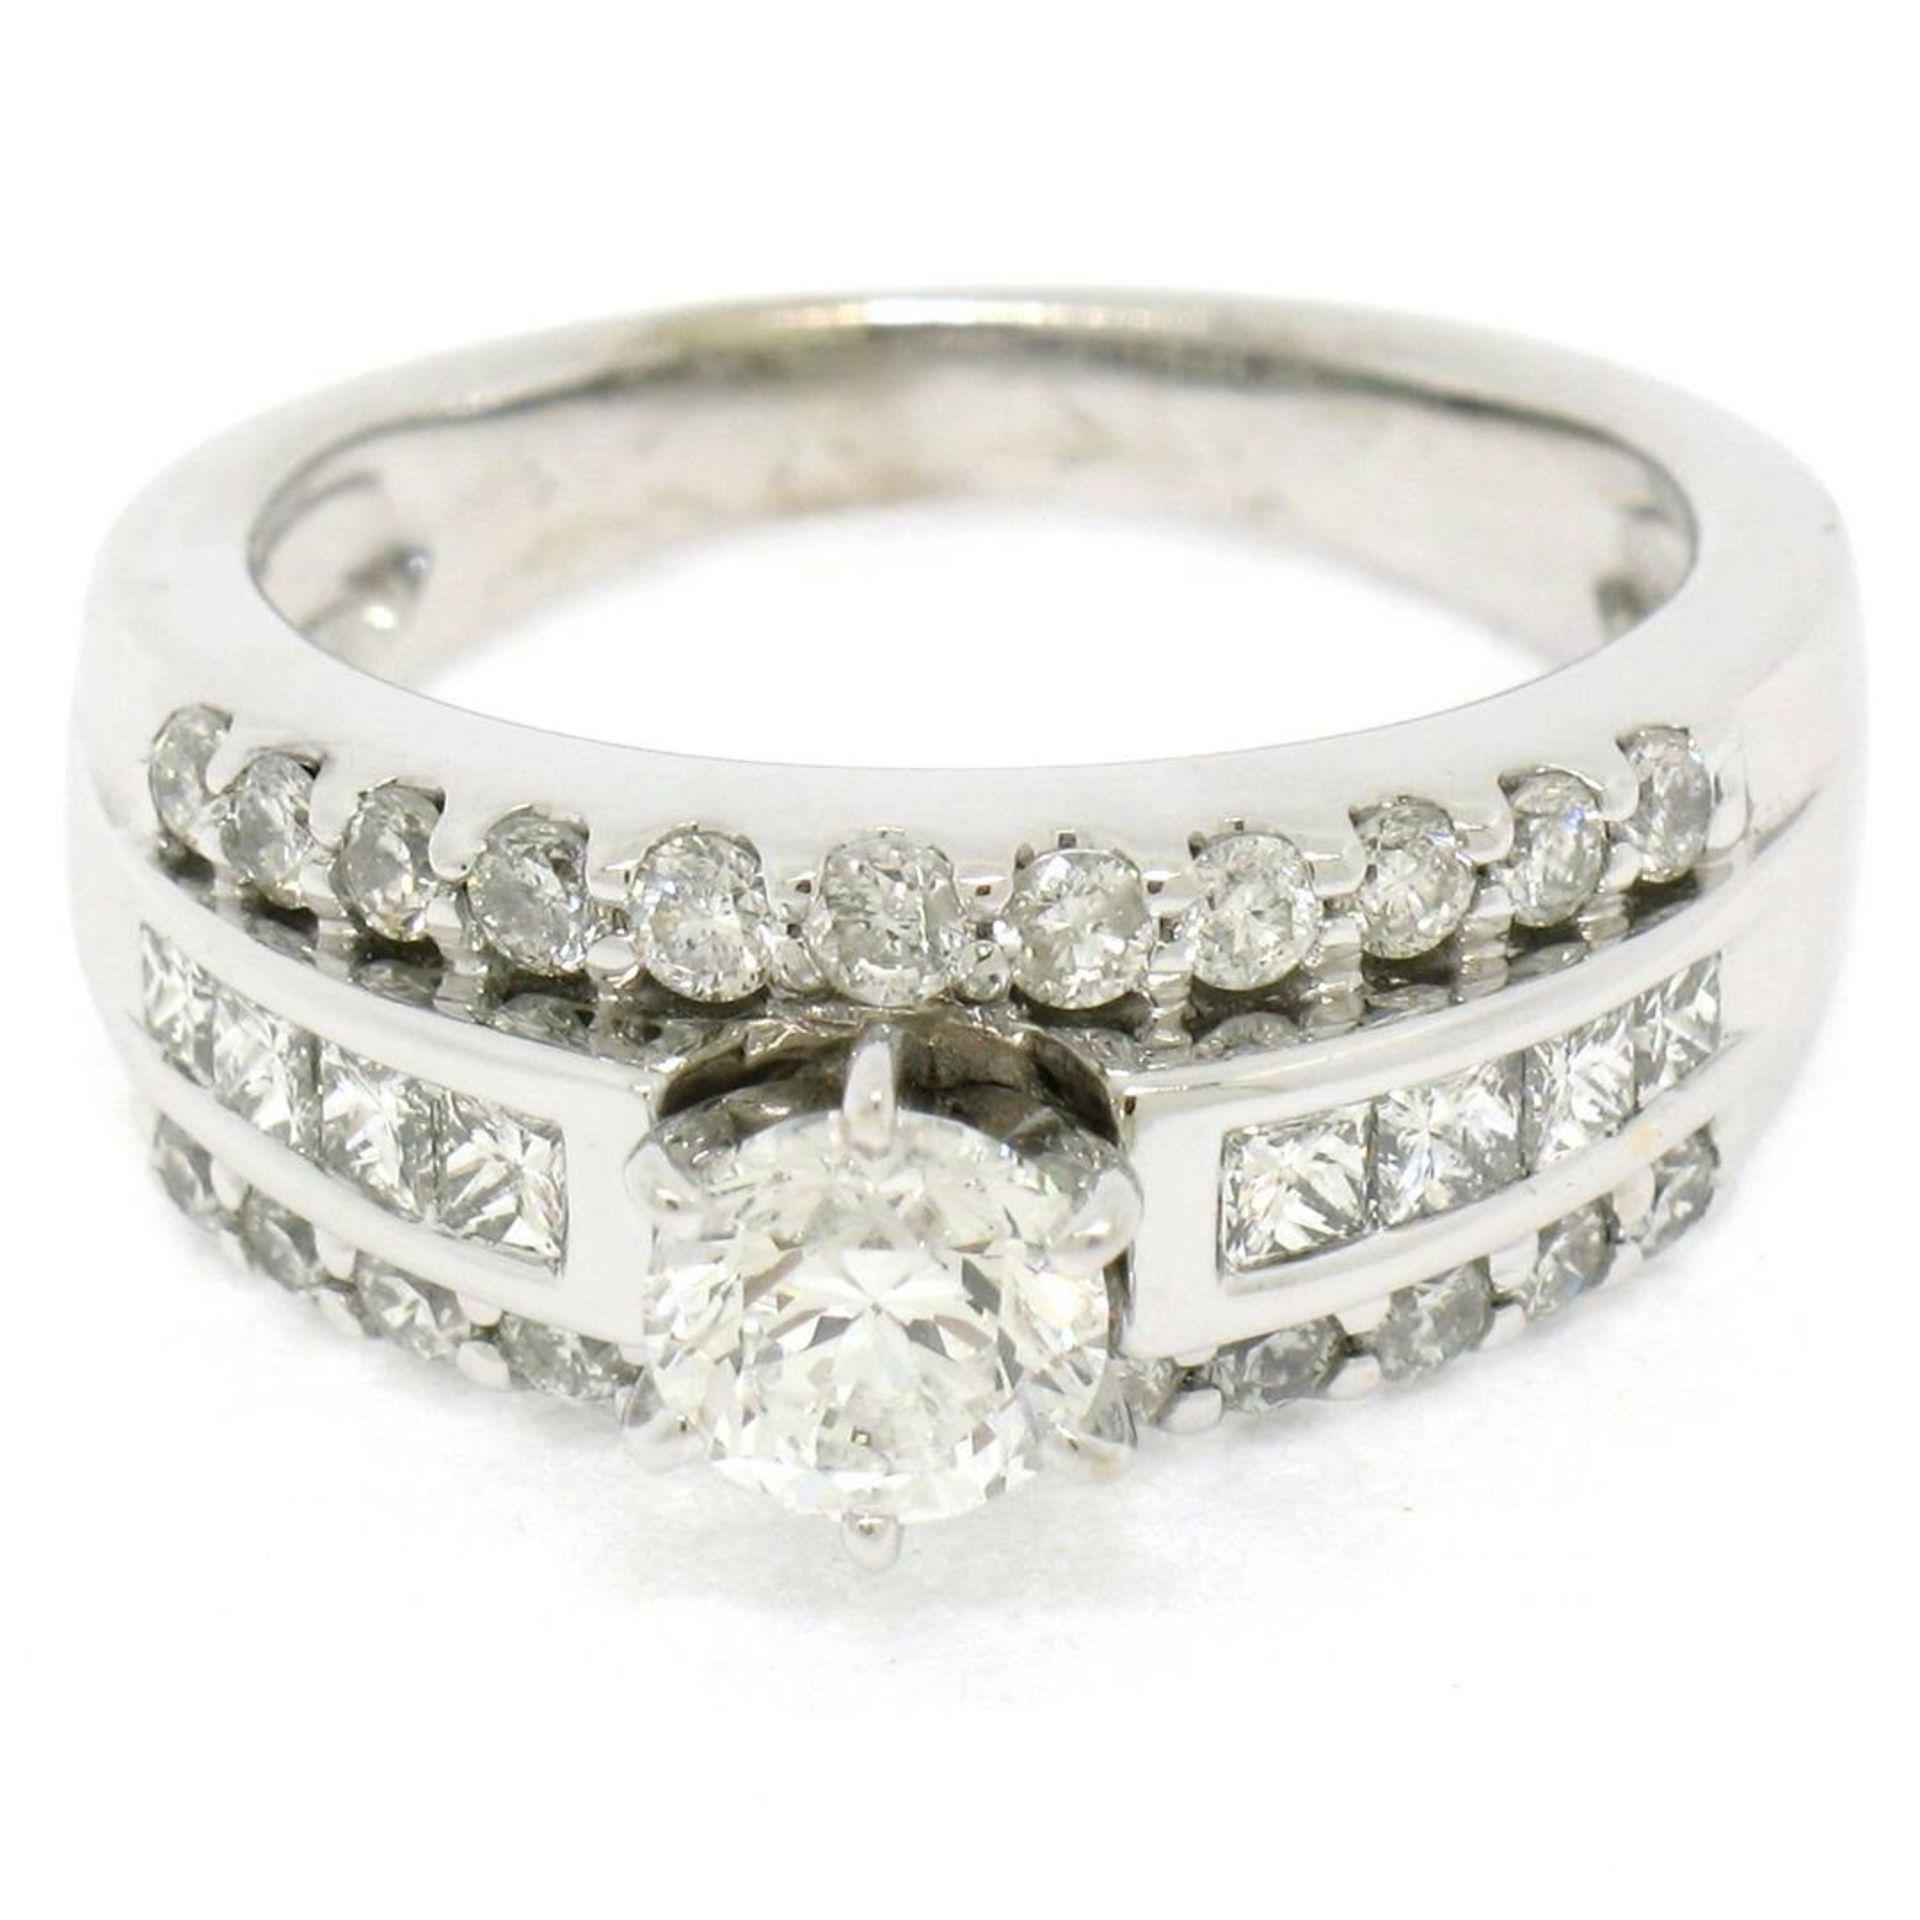 14K White Gold 1.39ctw Prong Round & Channel Princess Diamond Engagement Ring - Image 3 of 9